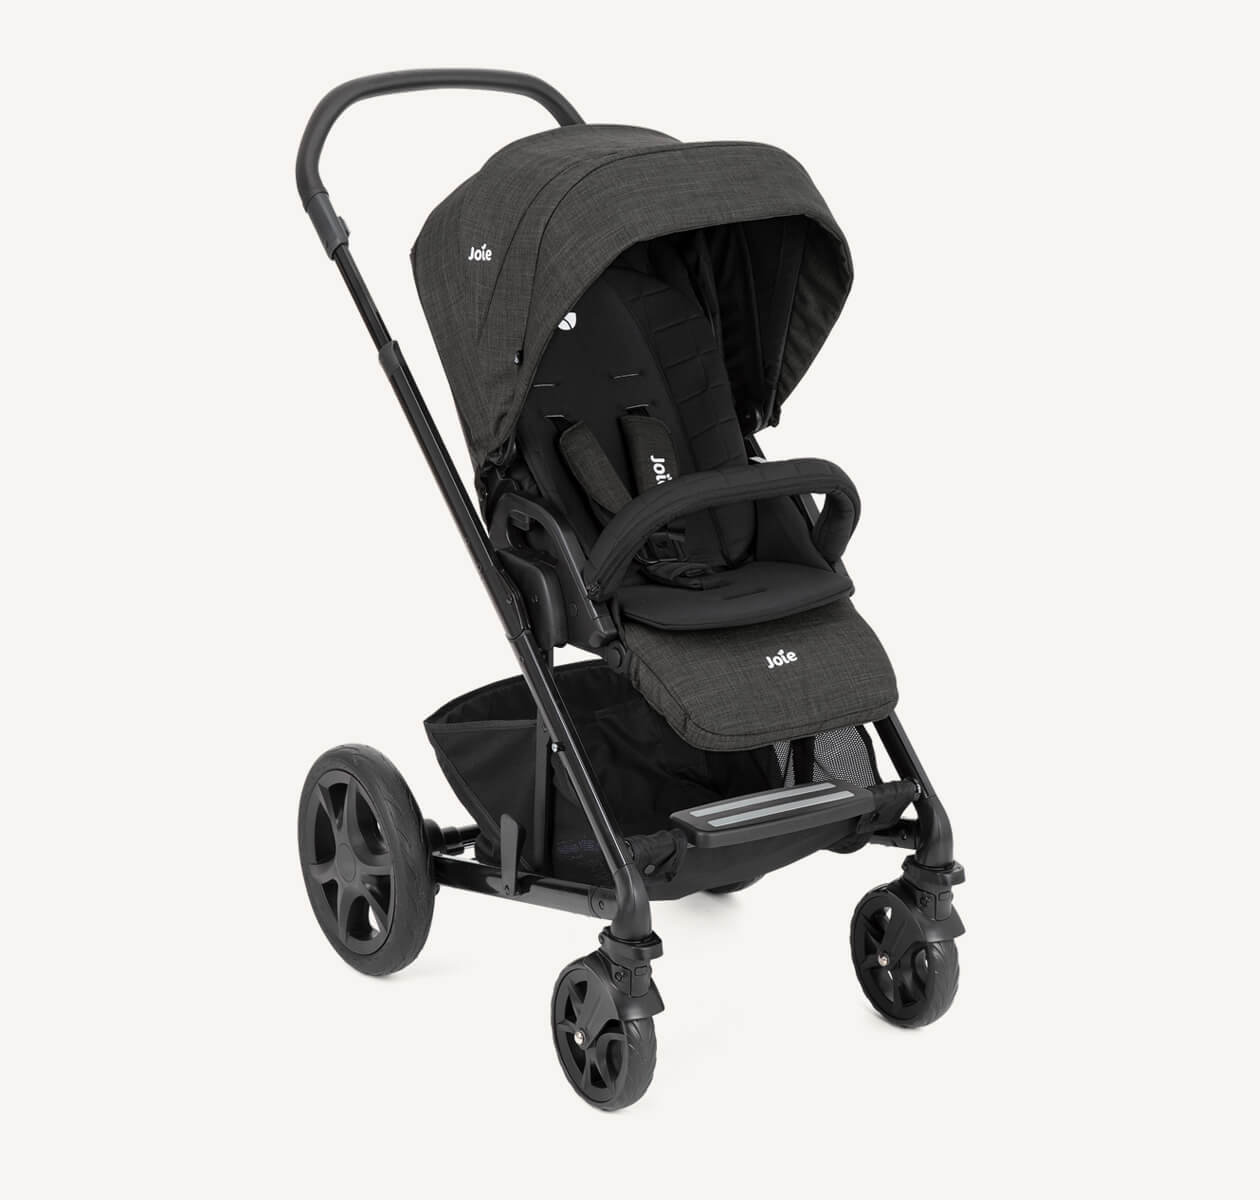  The Joie Chrome DLX pram in black at an angle facing to the right.